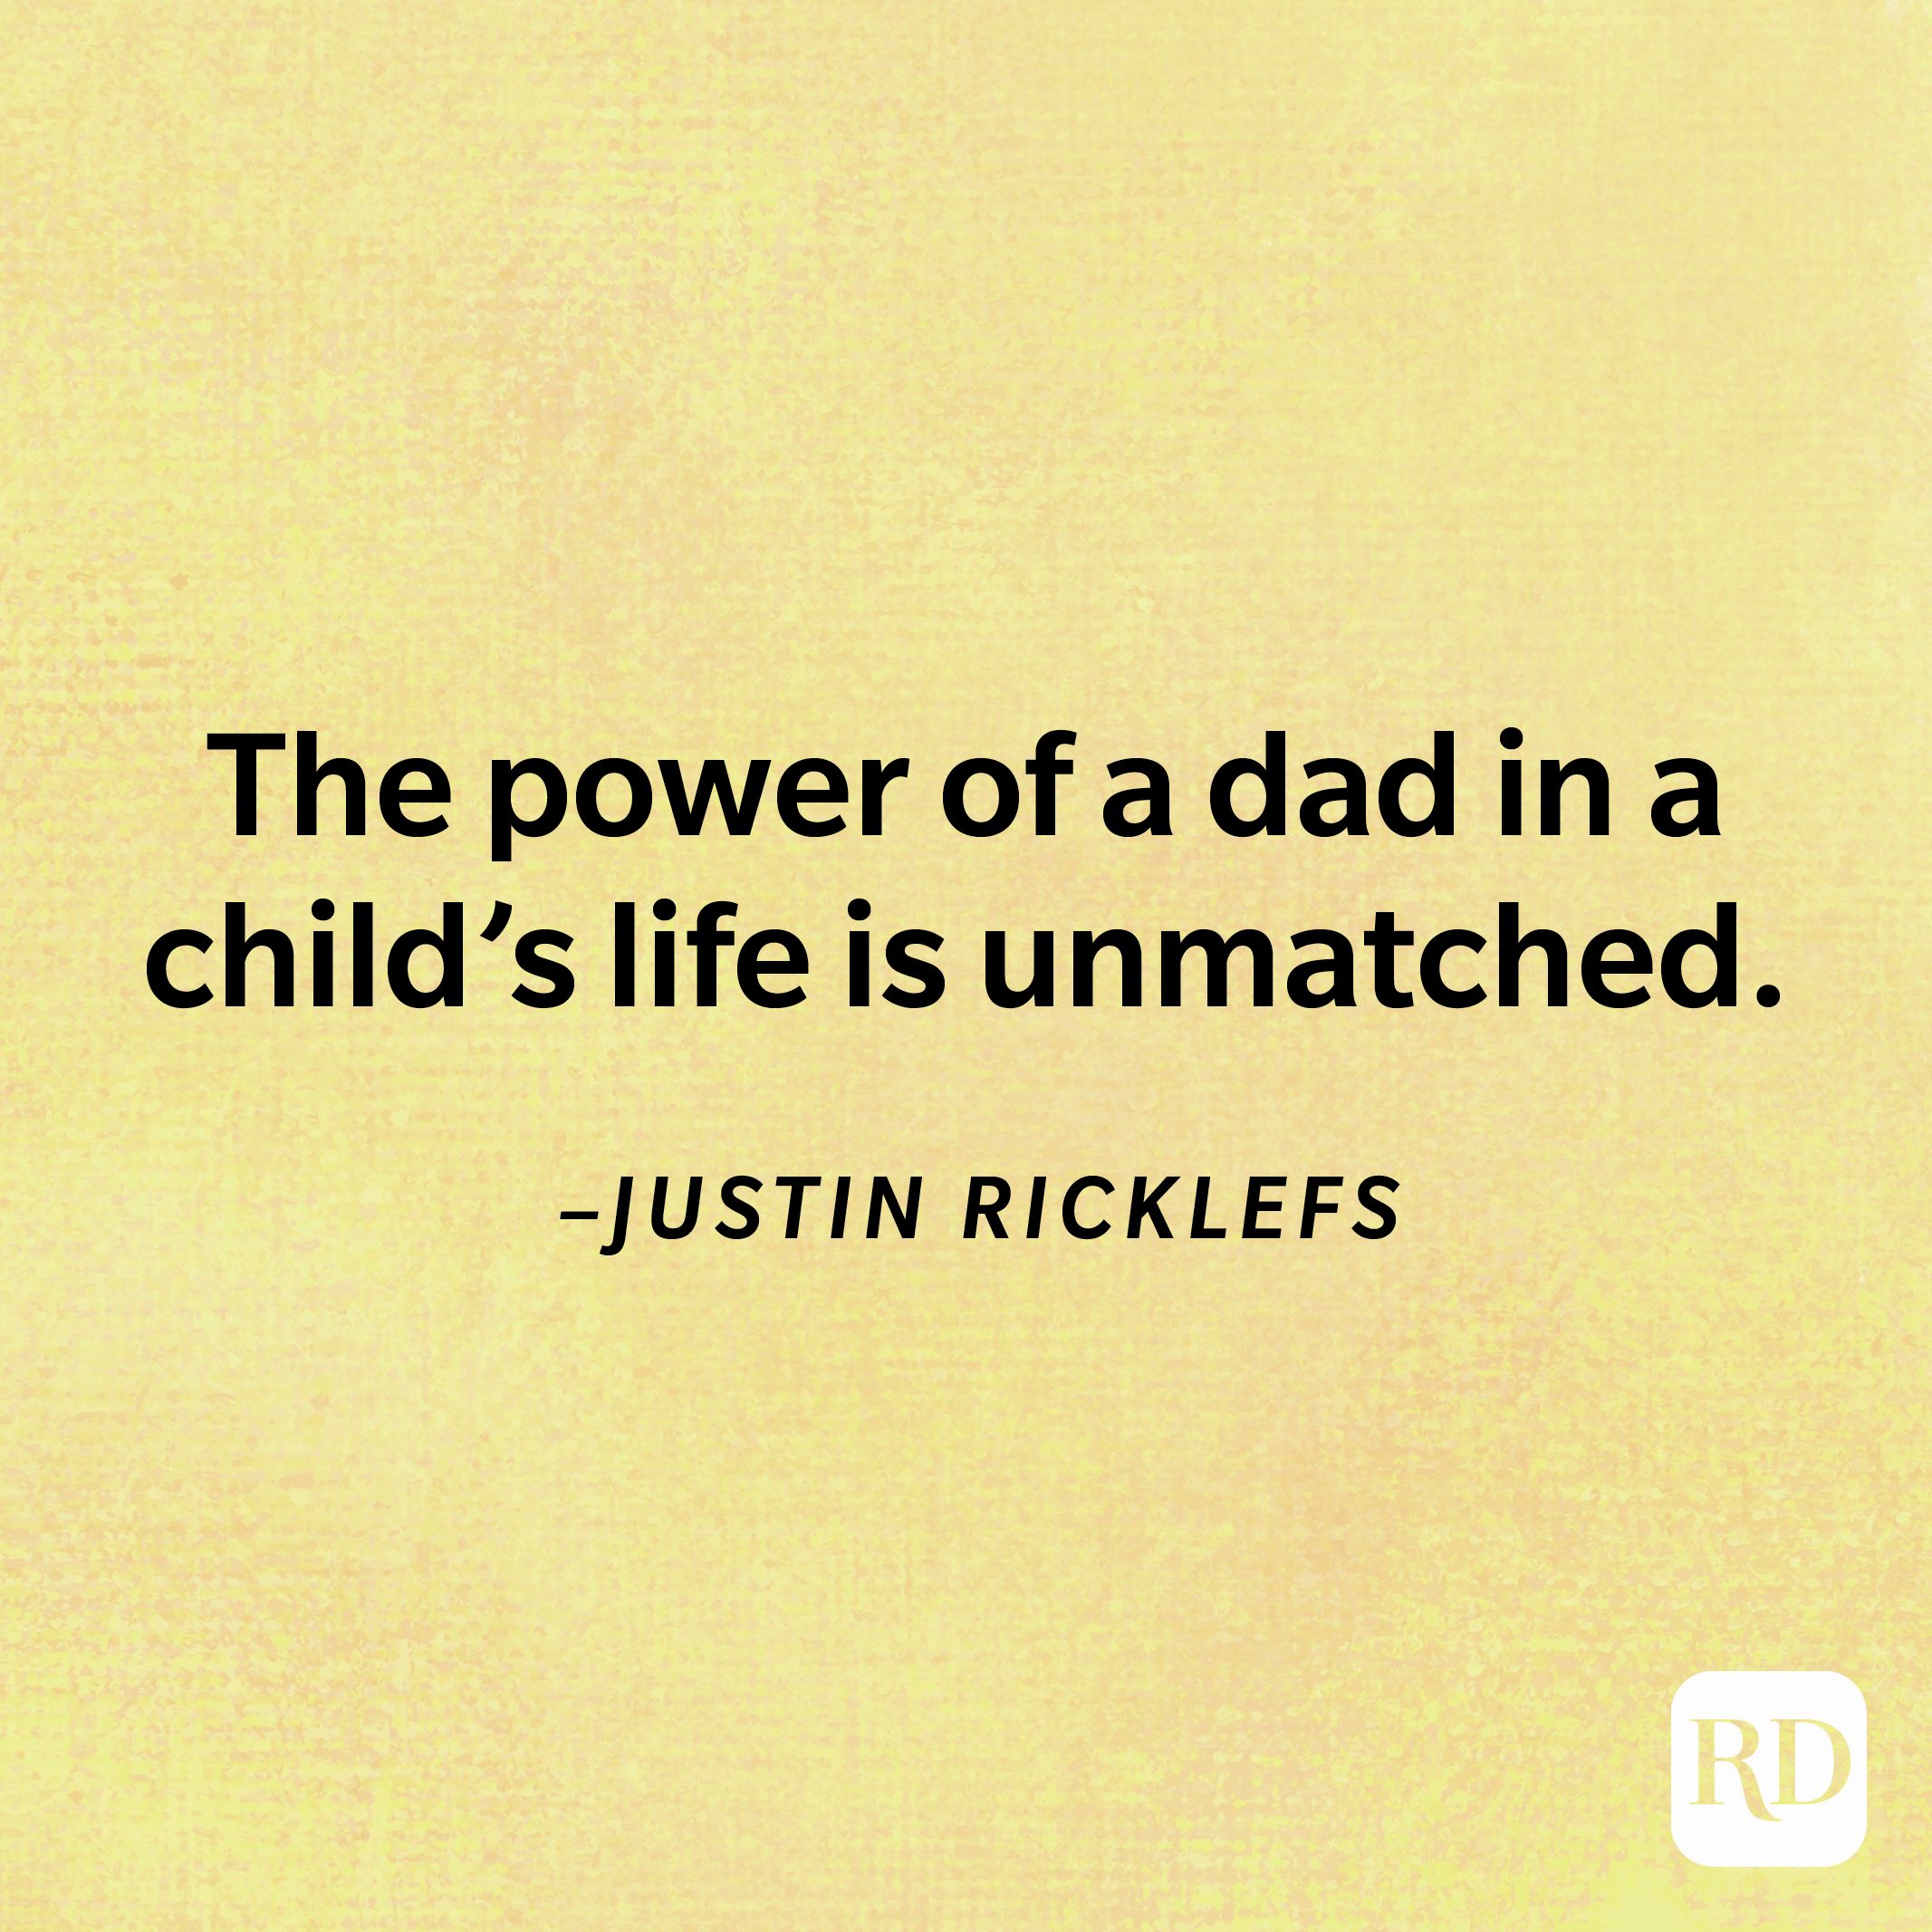 “The power of a dad in a child's life is unmatched.”—Justin Ricklefs